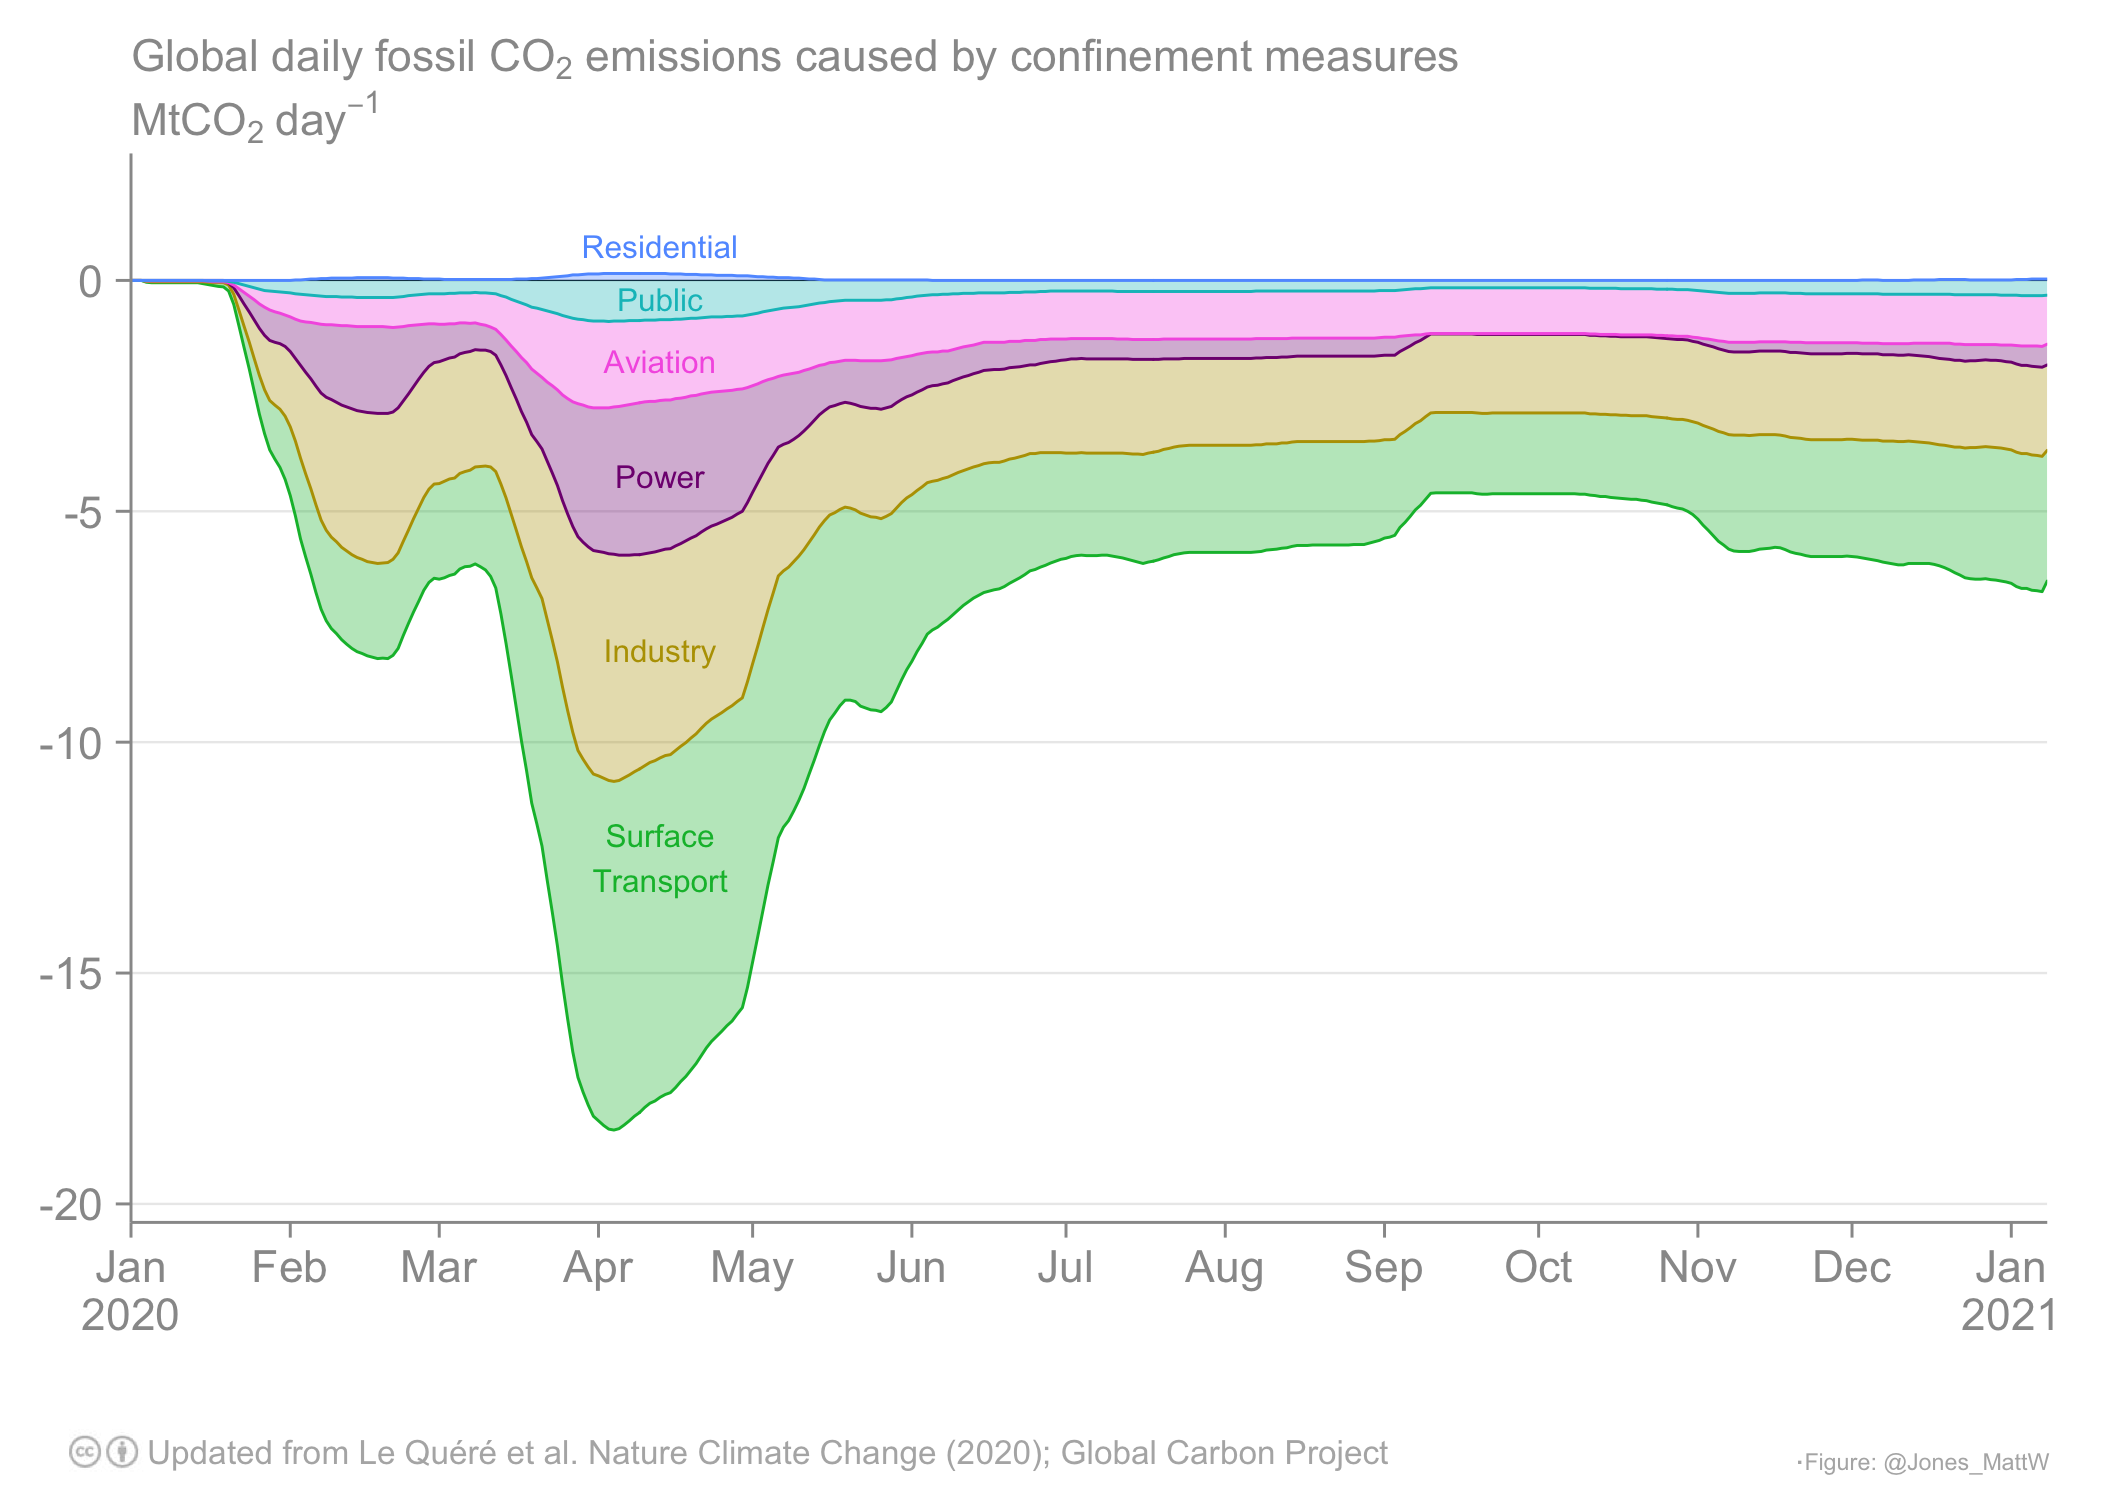 Estimated change in global daily fossil CO2 emissions caused by confinement measures by sector (MtCO2 day−1). The uncertainty ranges represent the full range of our estimates. Changes are relative to mean daily emissions in 2019 from those sectors. See Le Quéré et al. (2021) for details